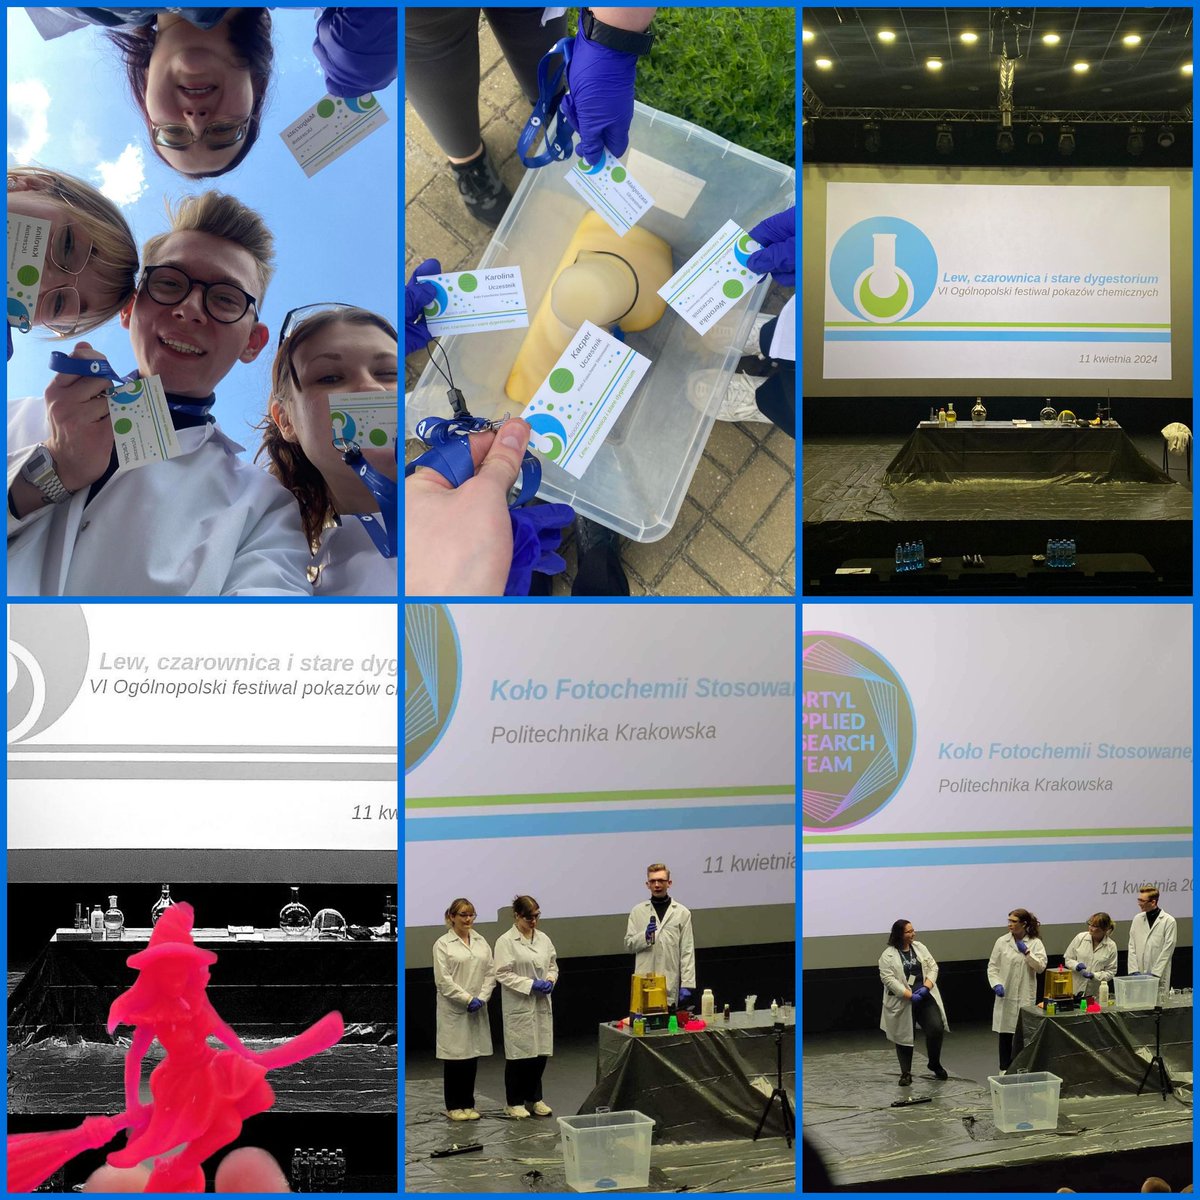 The National Chemistry Demonstration Festival was held on April 11, 2024. It was attended by 11 student team from all over Poland. Our students also took part in the competition, which consisted of @gosianoworyta @WatorZuzanna @KacperP_3 @karolinakozamecka #OrtylPhotoLab